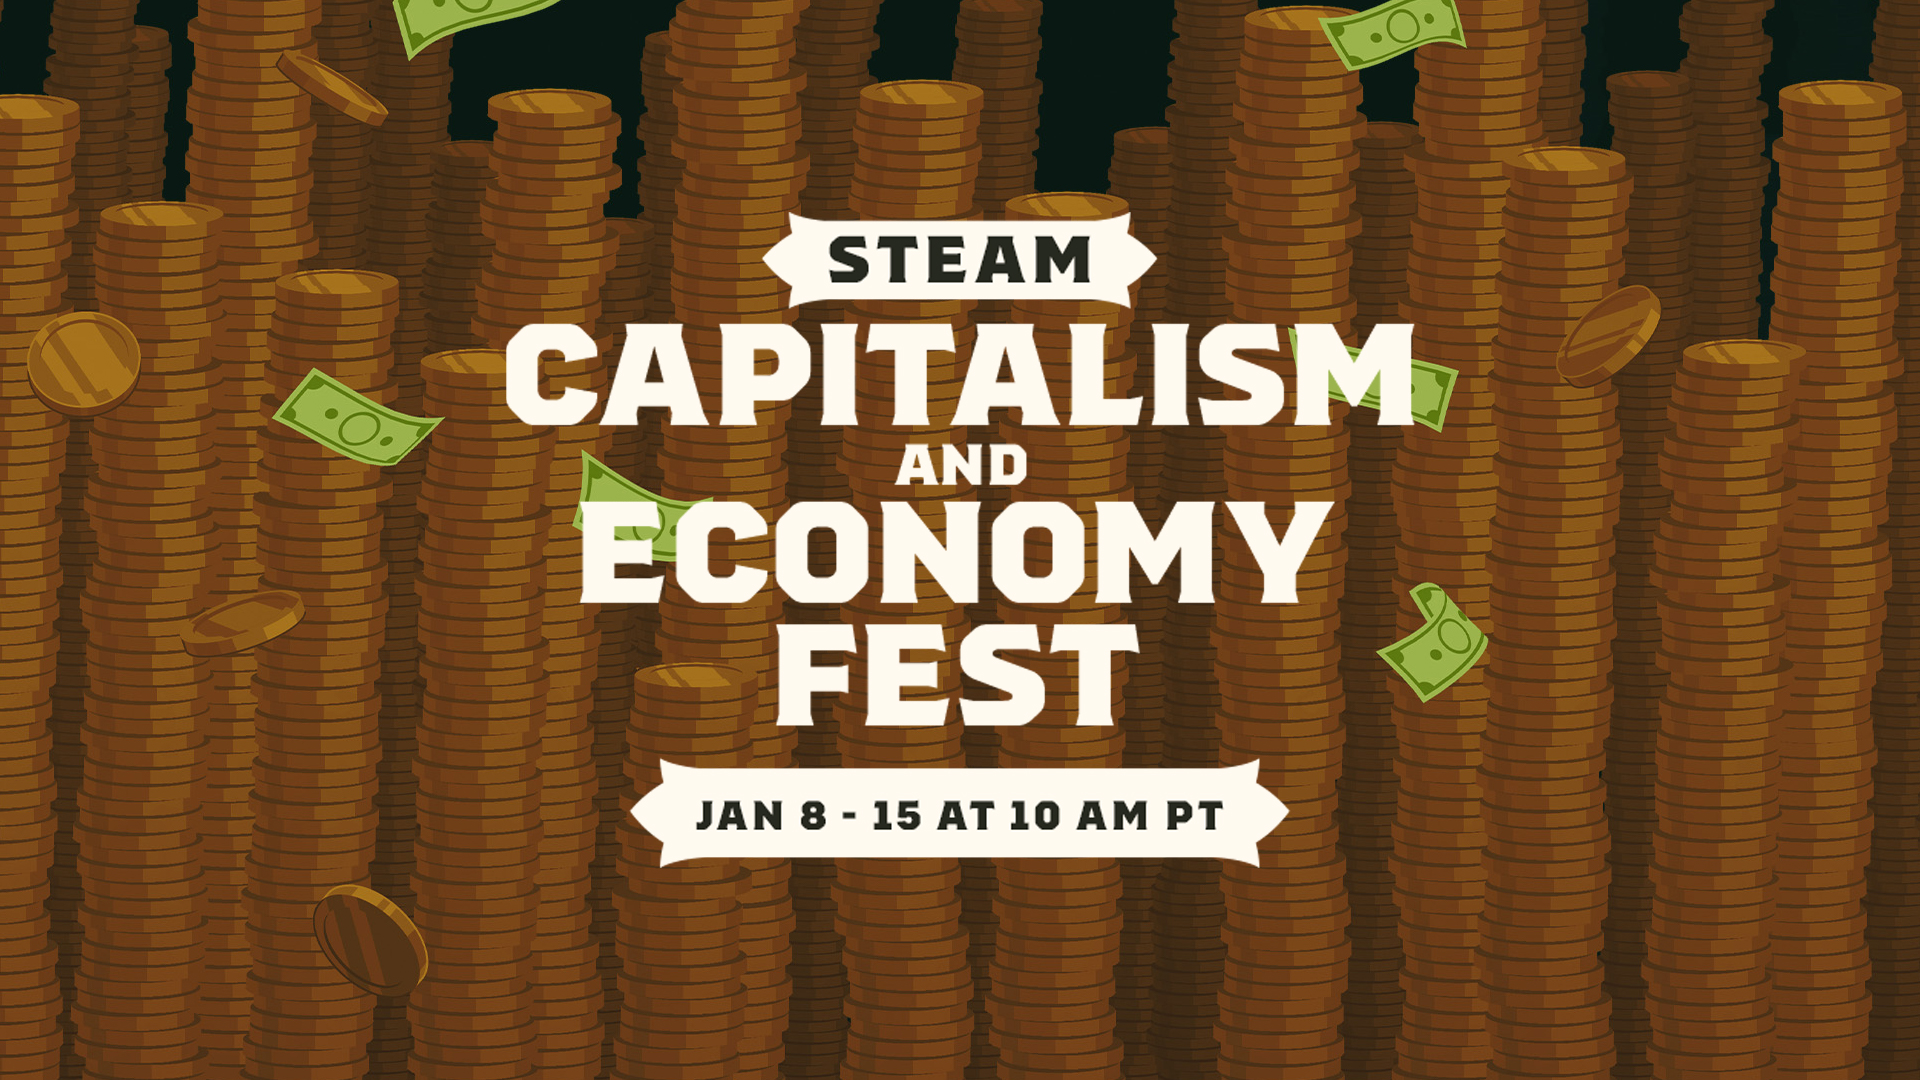 Steam Capitalism and Economy Fest Sale